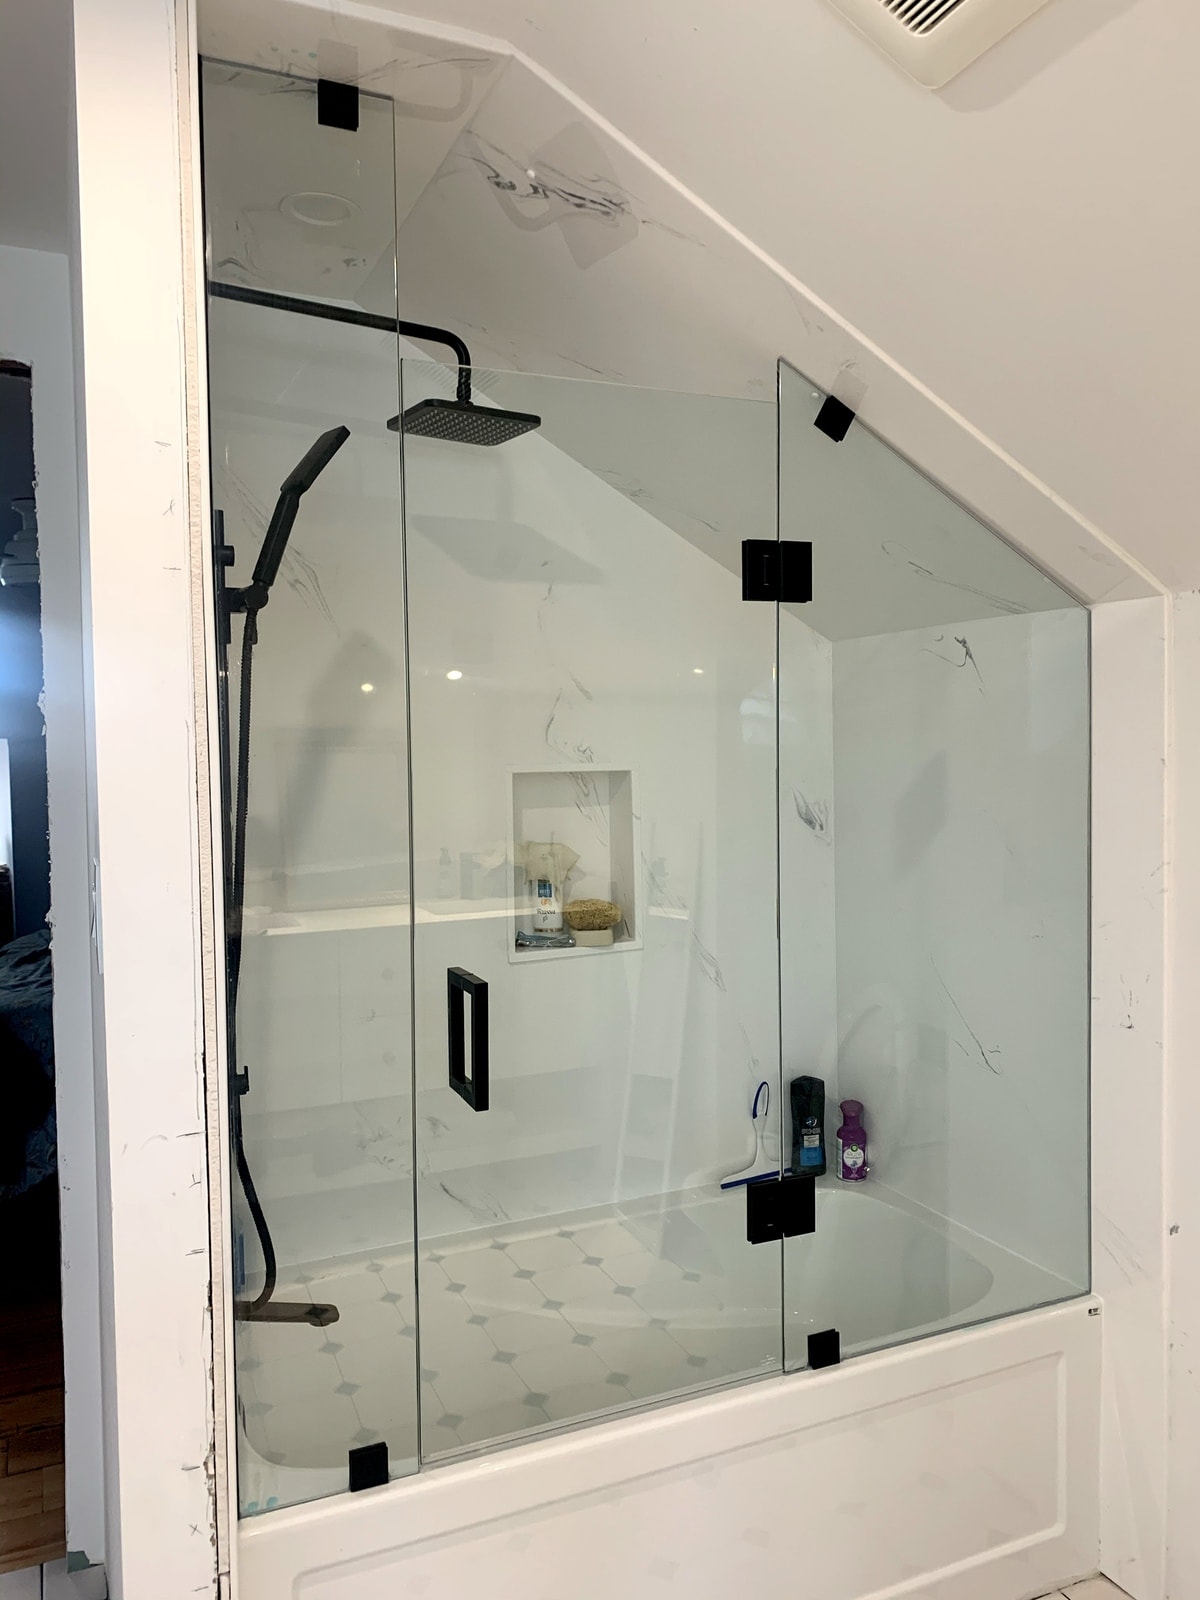 Complete with Walls, ceiling panels, niche, plumbing fixtures & frameless shower glass.